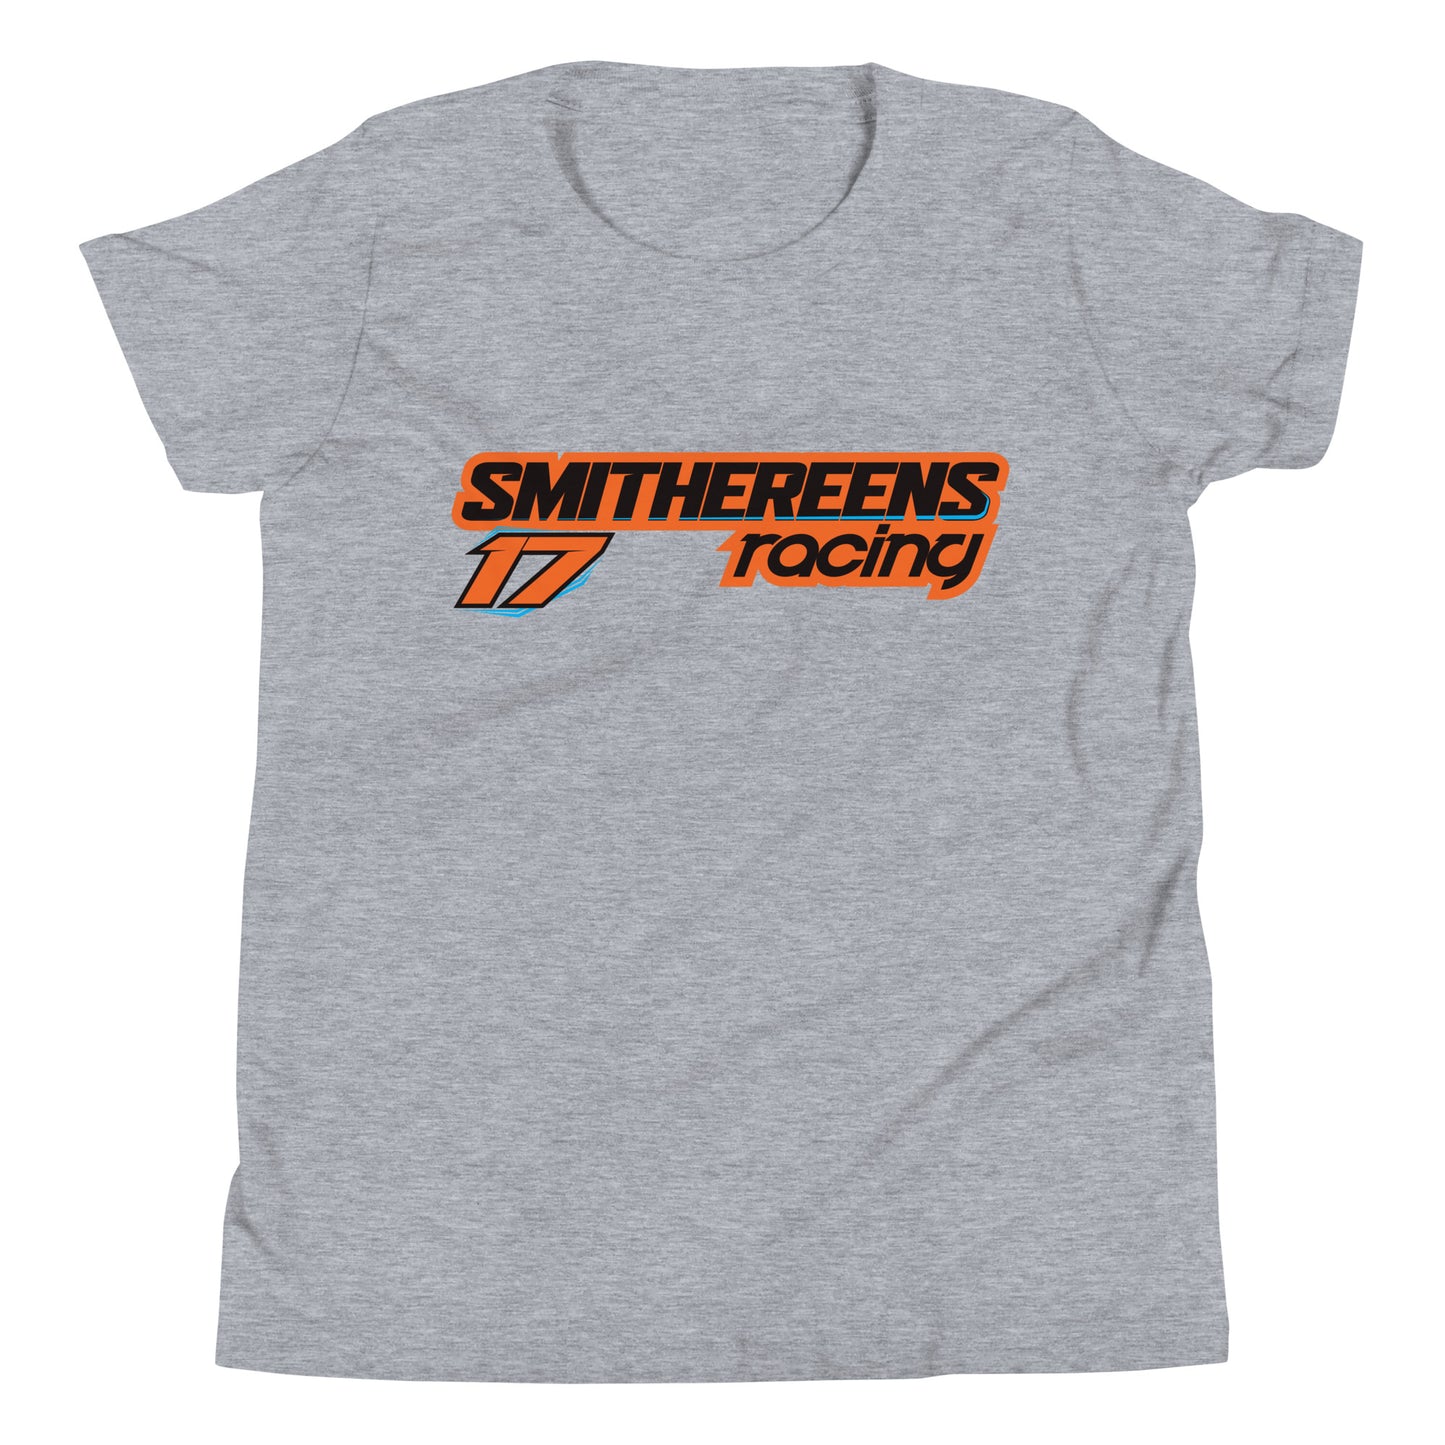 Smithereens Racing YOUTH T-Shirt